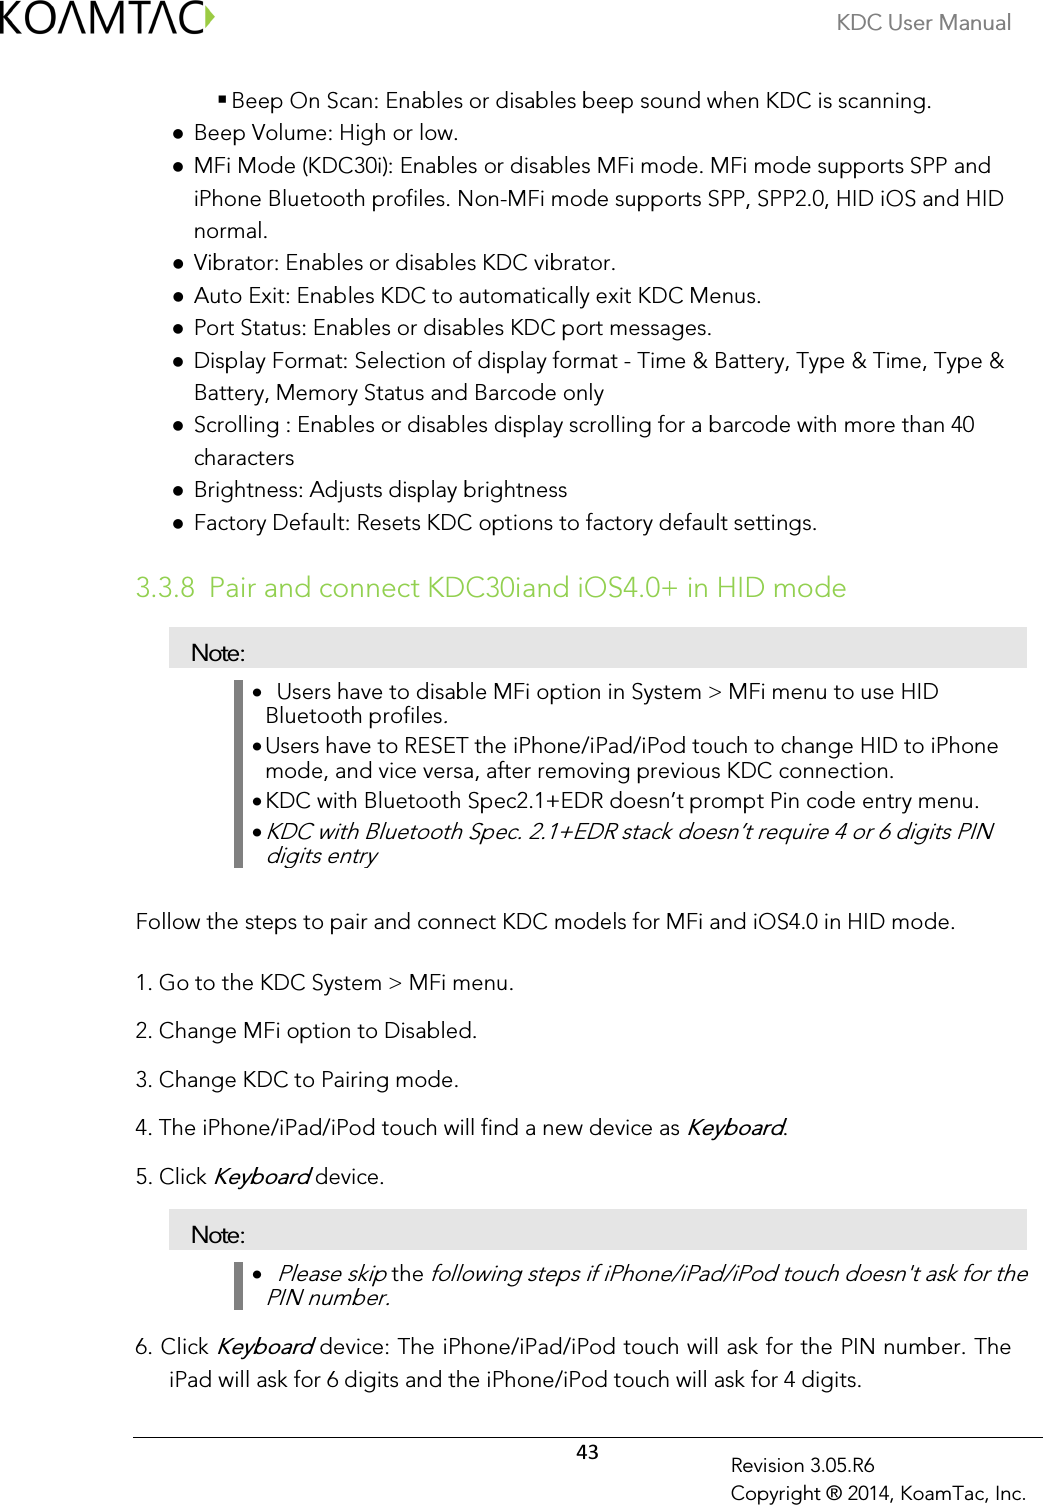 KDC User Manual  43 Revision 3.05.R6 Copyright ® 2014, KoamTac, Inc.  Beep On Scan: Enables or disables beep sound when KDC is scanning.  Beep Volume: High or low.  MFi Mode (KDC30i): Enables or disables MFi mode. MFi mode supports SPP and iPhone Bluetooth profiles. Non-MFi mode supports SPP, SPP2.0, HID iOS and HID normal.  Vibrator: Enables or disables KDC vibrator.  Auto Exit: Enables KDC to automatically exit KDC Menus.  Port Status: Enables or disables KDC port messages.  Display Format: Selection of display format - Time &amp; Battery, Type &amp; Time, Type &amp; Battery, Memory Status and Barcode only  Scrolling : Enables or disables display scrolling for a barcode with more than 40 characters  Brightness: Adjusts display brightness  Factory Default: Resets KDC options to factory default settings.  3.3.8 Pair and connect KDC30iand iOS4.0+ in HID mode Note: •   Users have to disable MFi option in System &gt; MFi menu to use HID Bluetooth profiles. • Users have to RESET the iPhone/iPad/iPod touch to change HID to iPhone mode, and vice versa, after removing previous KDC connection. • KDC with Bluetooth Spec2.1+EDR doesn’t prompt Pin code entry menu. • KDC with Bluetooth Spec. 2.1+EDR stack doesn’t require 4 or 6 digits PIN digits entry Follow the steps to pair and connect KDC models for MFi and iOS4.0 in HID mode.  1. Go to the KDC System &gt; MFi menu. 2. Change MFi option to Disabled. 3. Change KDC to Pairing mode. 4. The iPhone/iPad/iPod touch will find a new device as Keyboard. 5. Click Keyboard device. Note: •   Please skip the following steps if iPhone/iPad/iPod touch doesn&apos;t ask for the PIN number. 6. Click Keyboard device: The iPhone/iPad/iPod touch will ask for the PIN number. The iPad will ask for 6 digits and the iPhone/iPod touch will ask for 4 digits. 